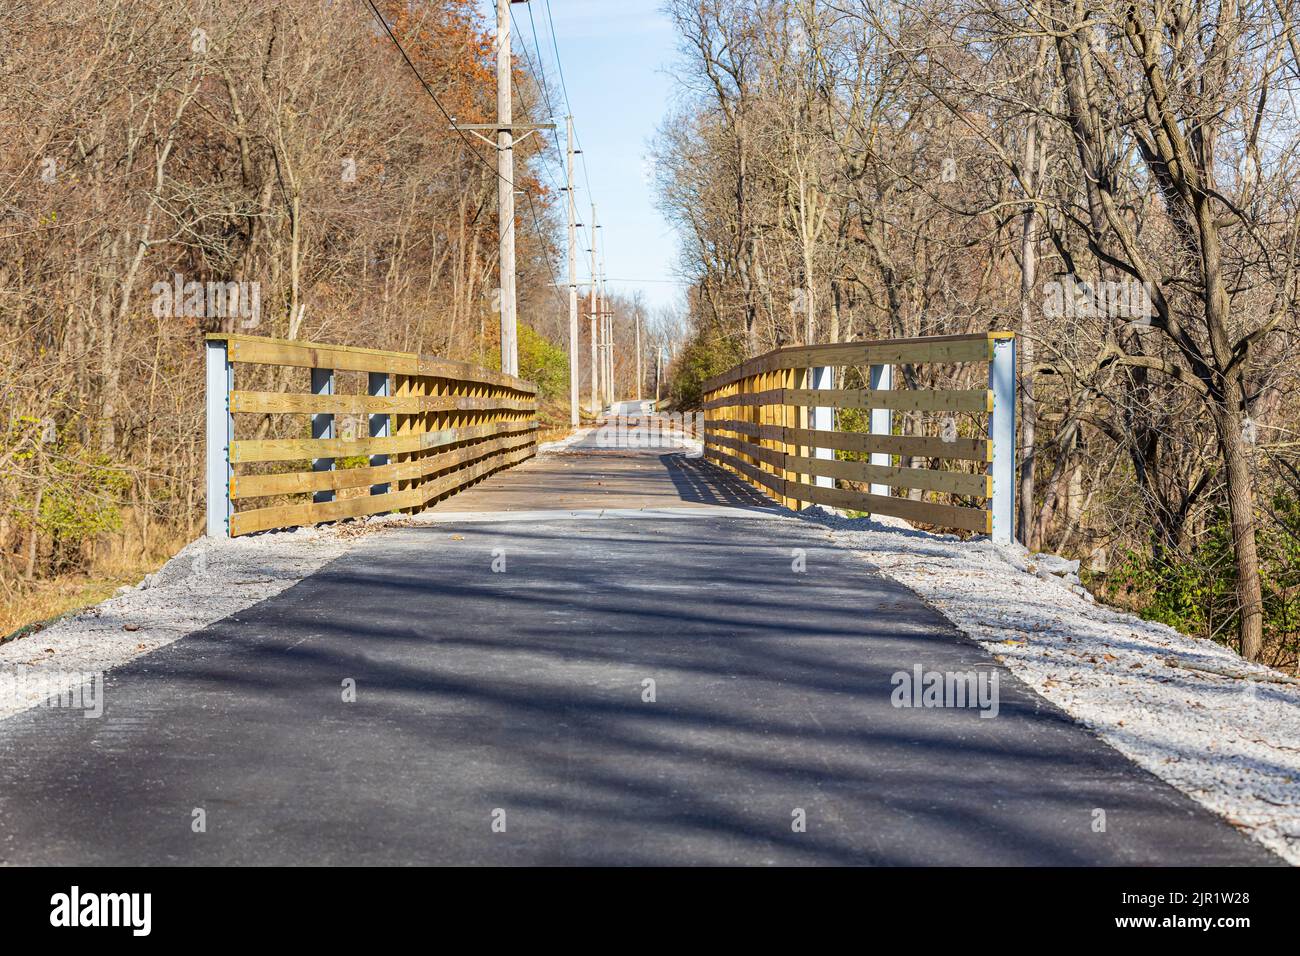 Multipurpose or multiuse bike trail in fall. Rail trail, outdoor recreation and bike path safety concept. Stock Photo